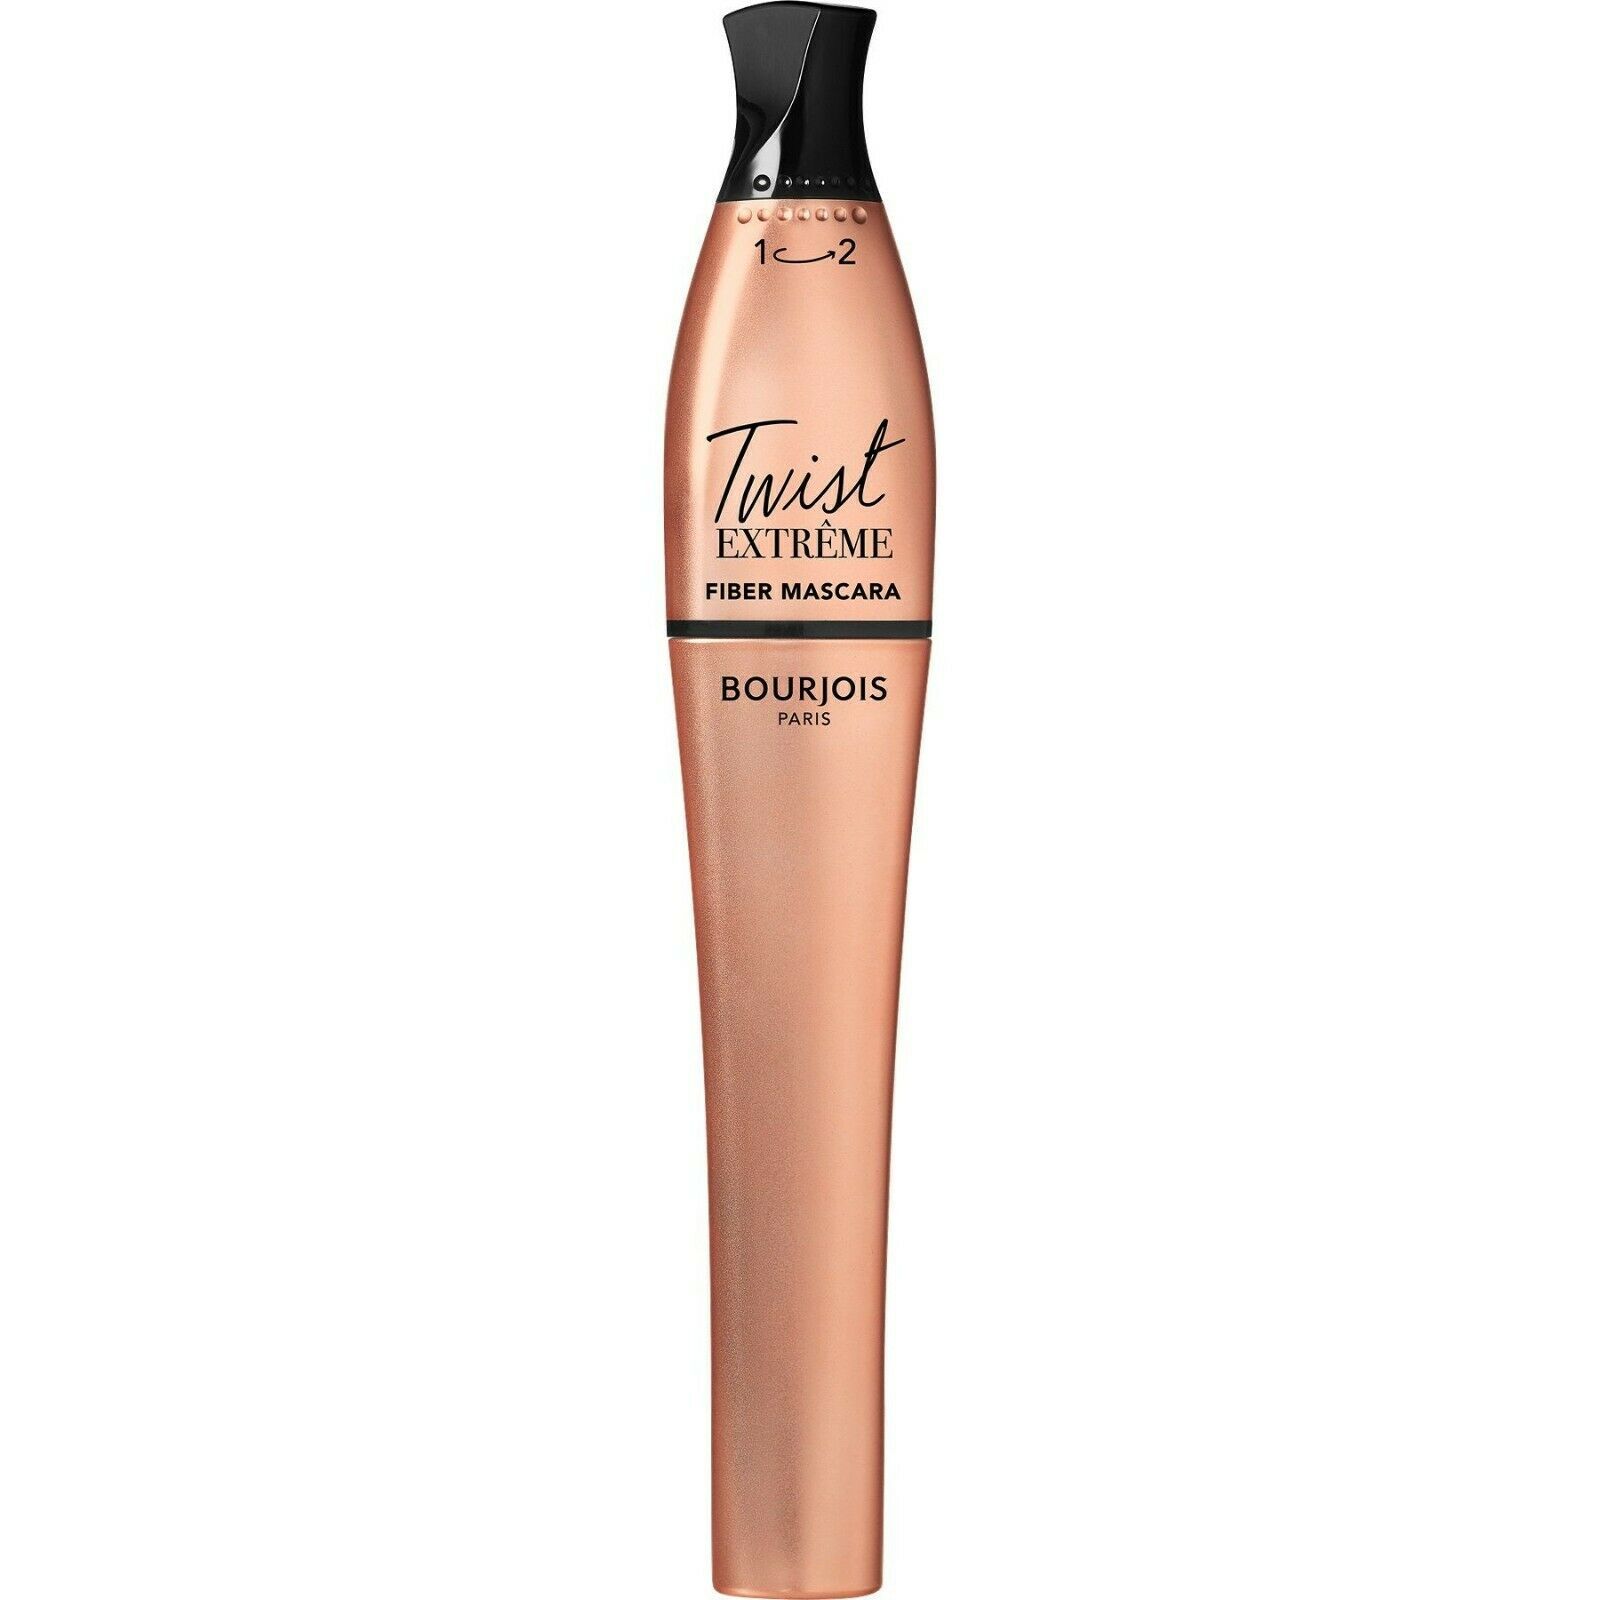 Spiral with an innovative rotary technology brush that fits perfectly into the shape of the eye and formula with added fiber to lift, volume and curl eyelashes. Gives eyelashes volume, curvature and length. Brand new & sealed.